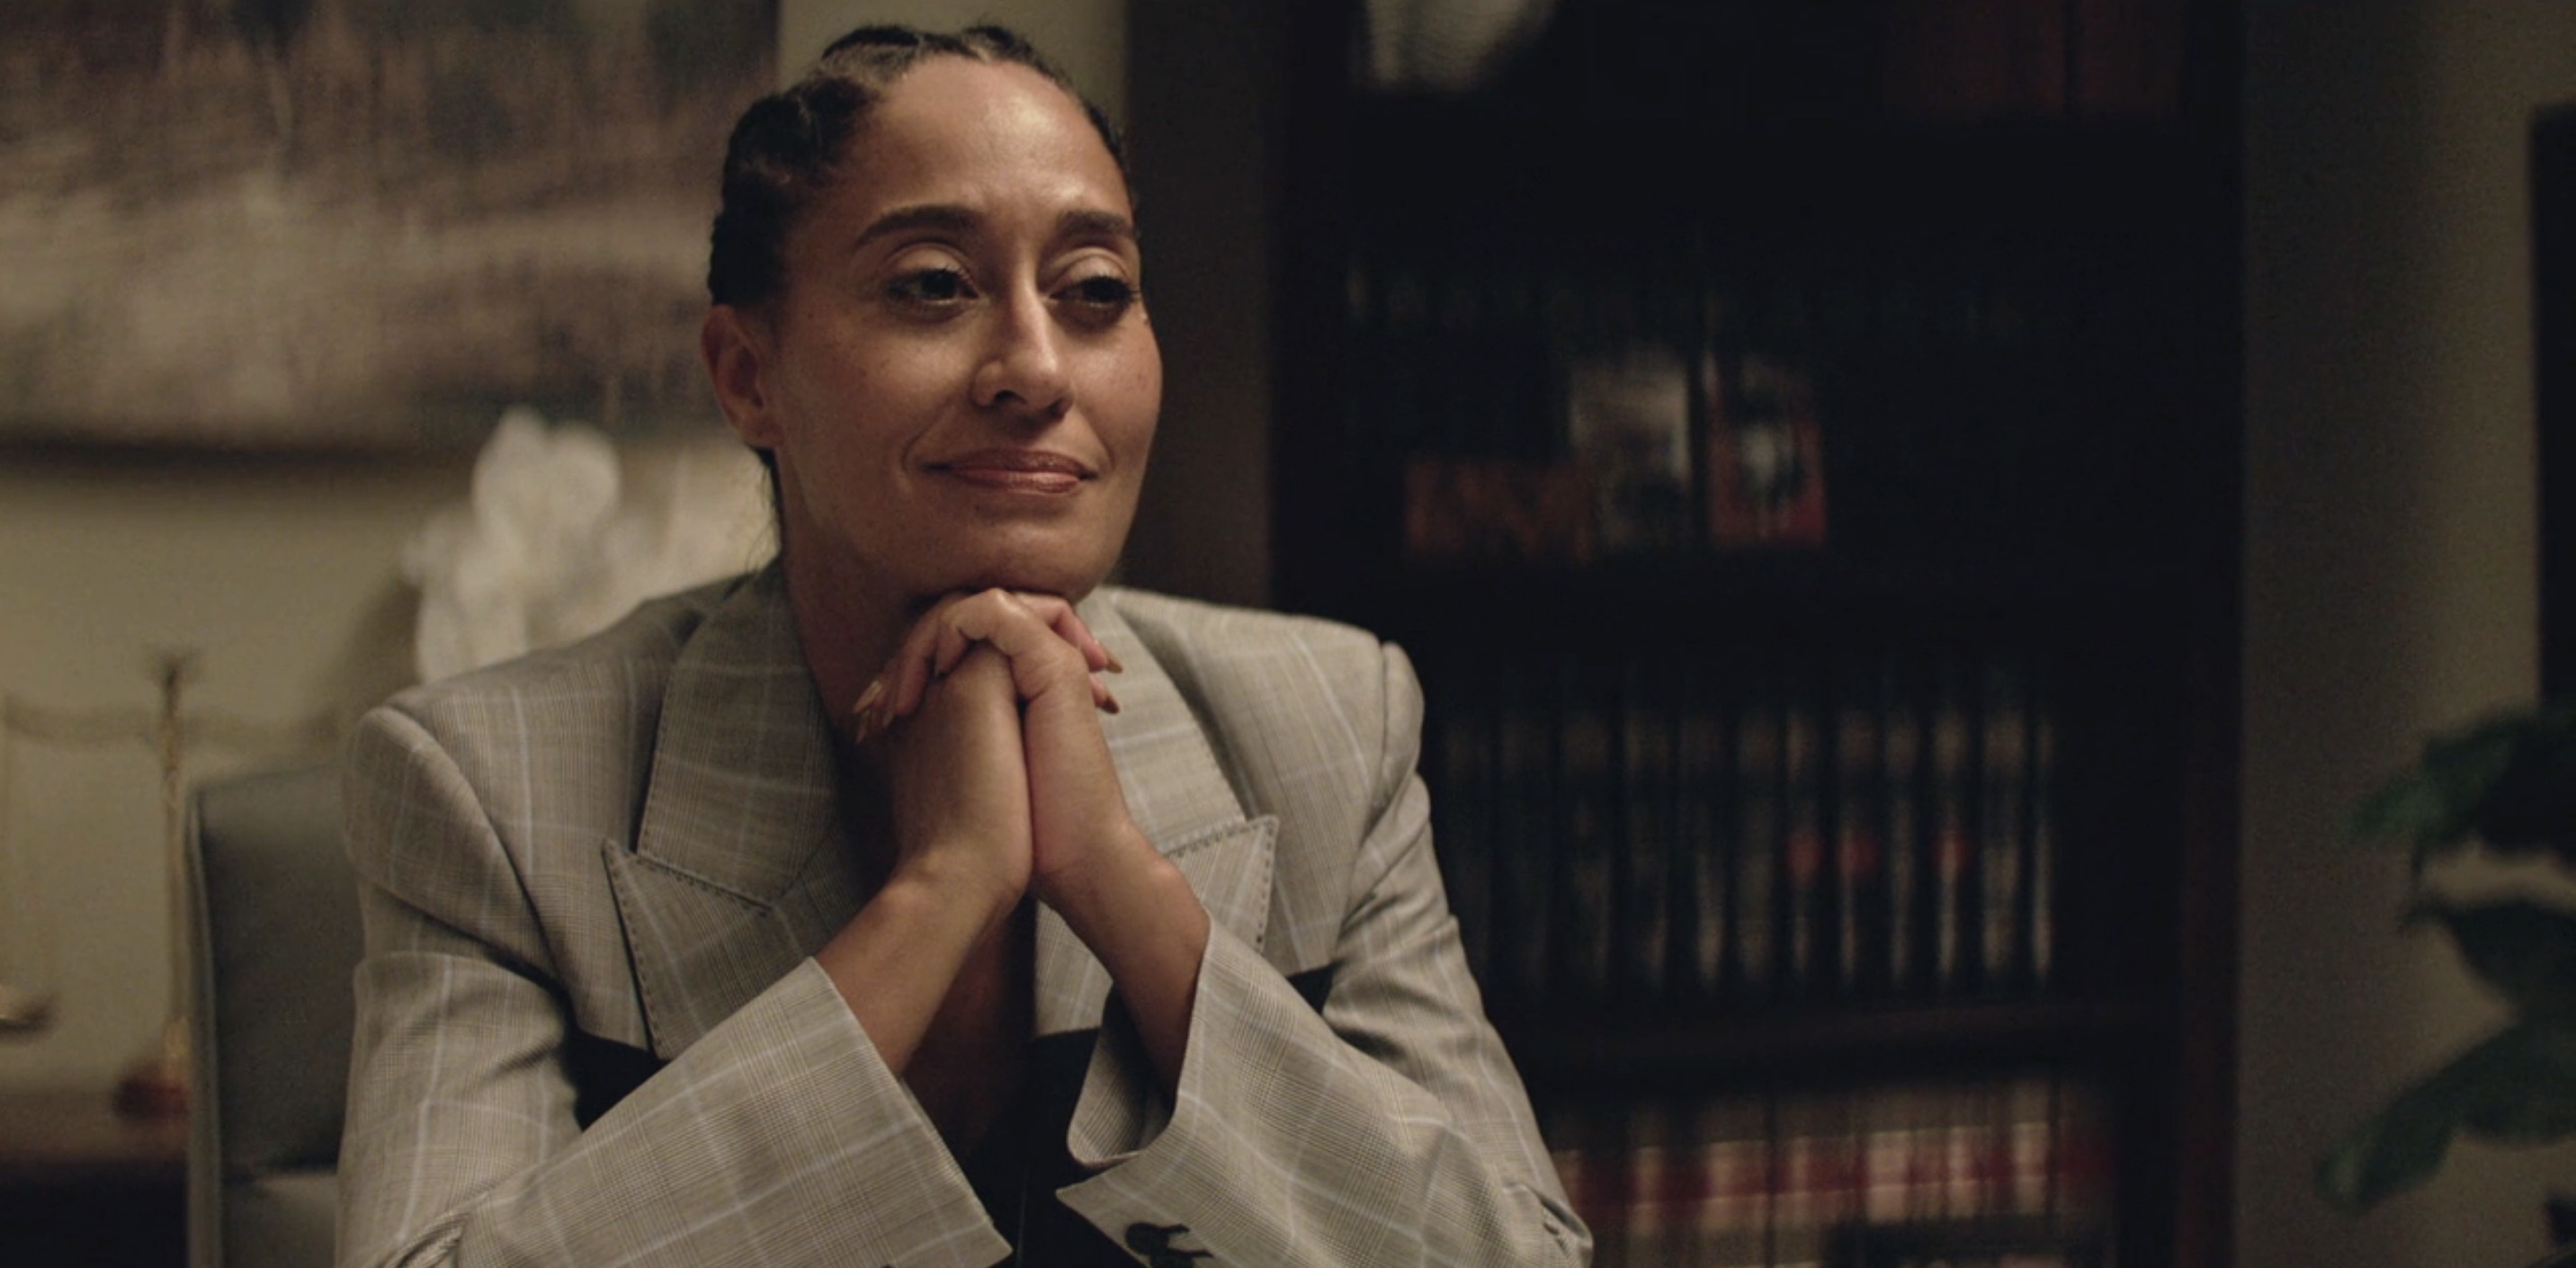 The Premise Cast - Tracee Ellis Ross as Rayna Bradshaw